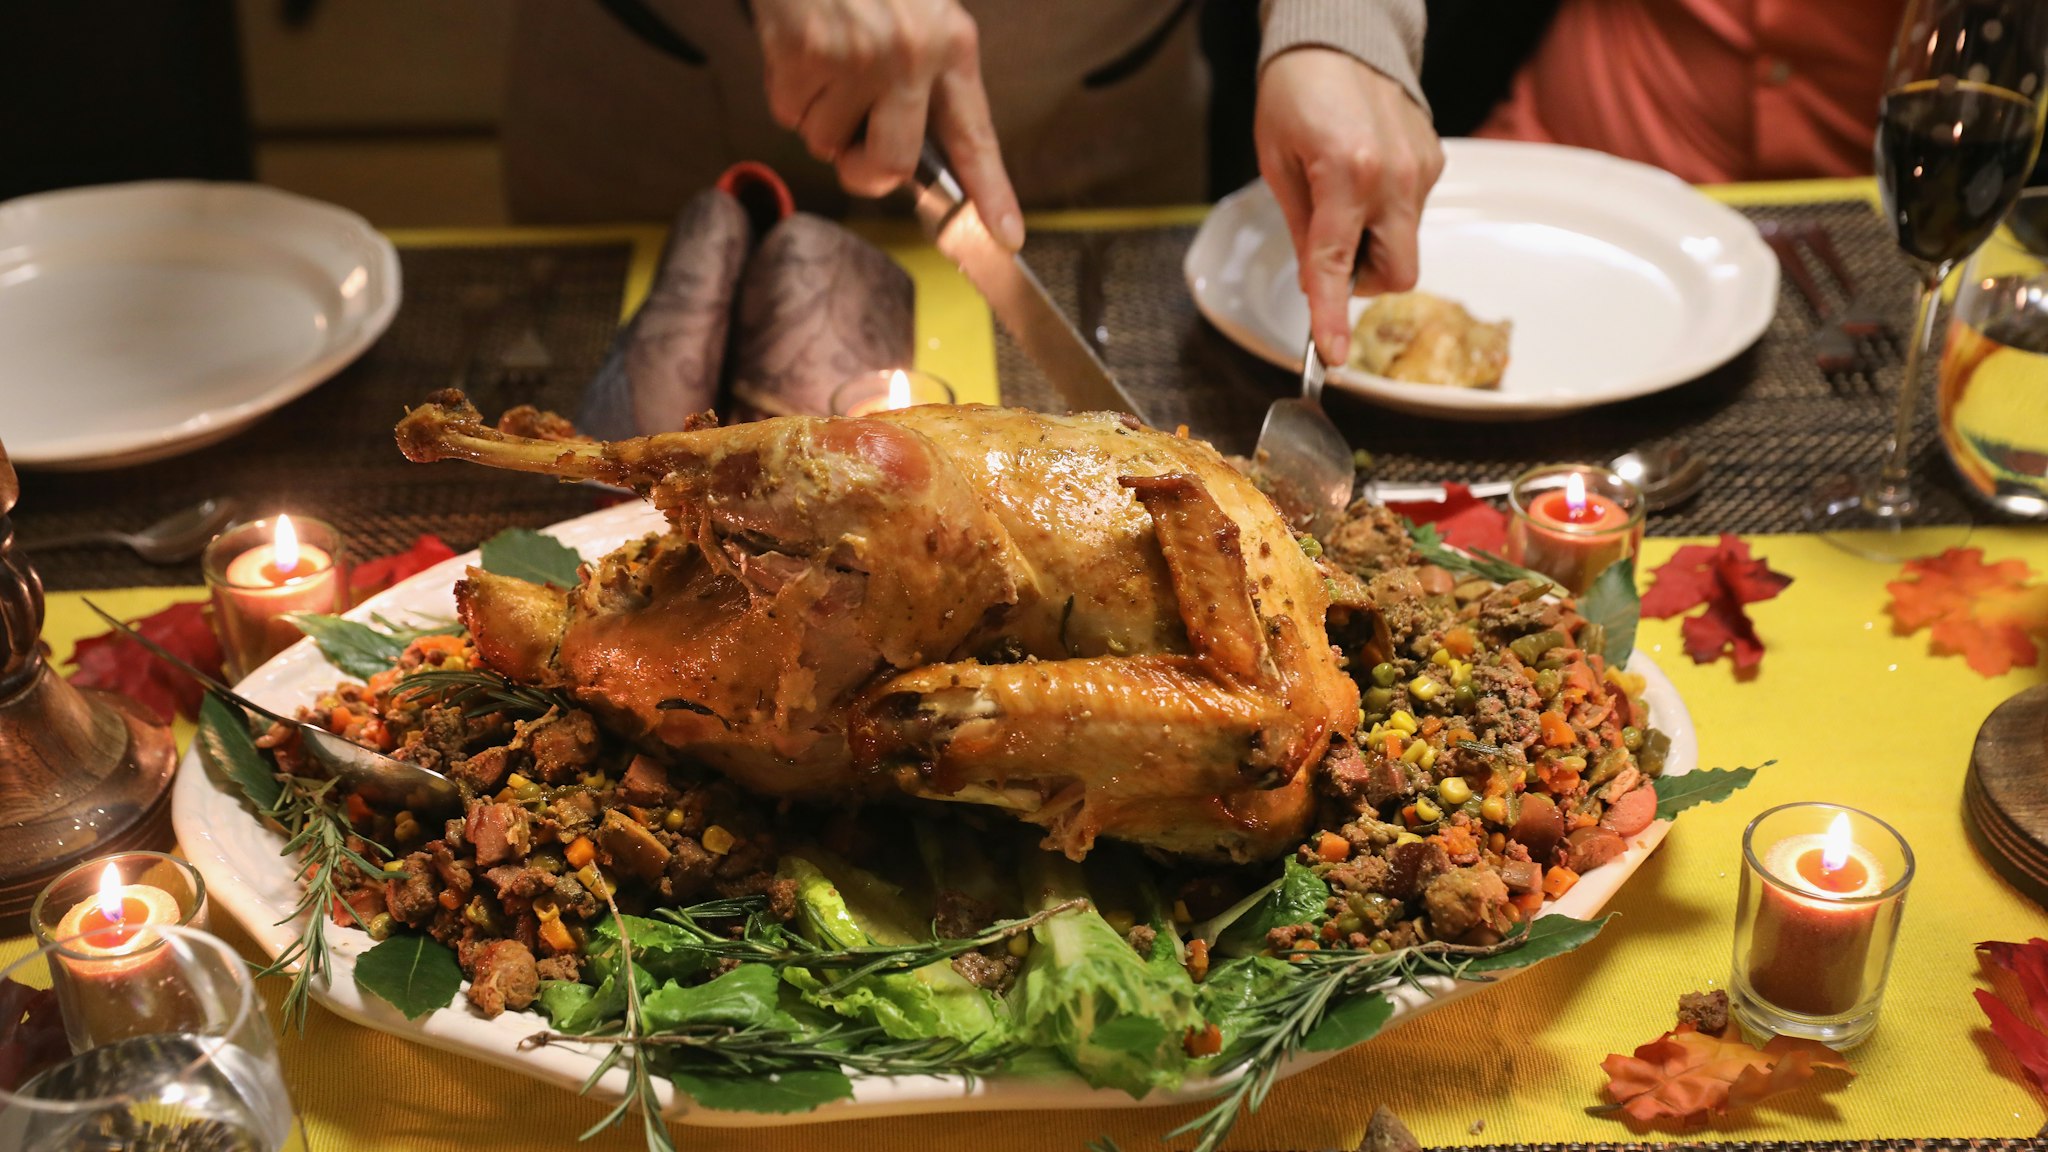 A Guatemalan immigrant carves the Thanksgiving turkey on November 24, 2016 in Stamford, Connecticut. Family and friends, some of them U.S. citizens, others on work visas and some undocumented immigrants came together in an apartment to celebrate the American holiday with turkey and Latin American dishes. They expressed concern with the results of the U.S. Presidential election of president-elect Donald Trump, some saying their U.S.-born children fear the possibilty their parents will be deported after Trump's inauguration. (Photo by John Moore/Getty Images)